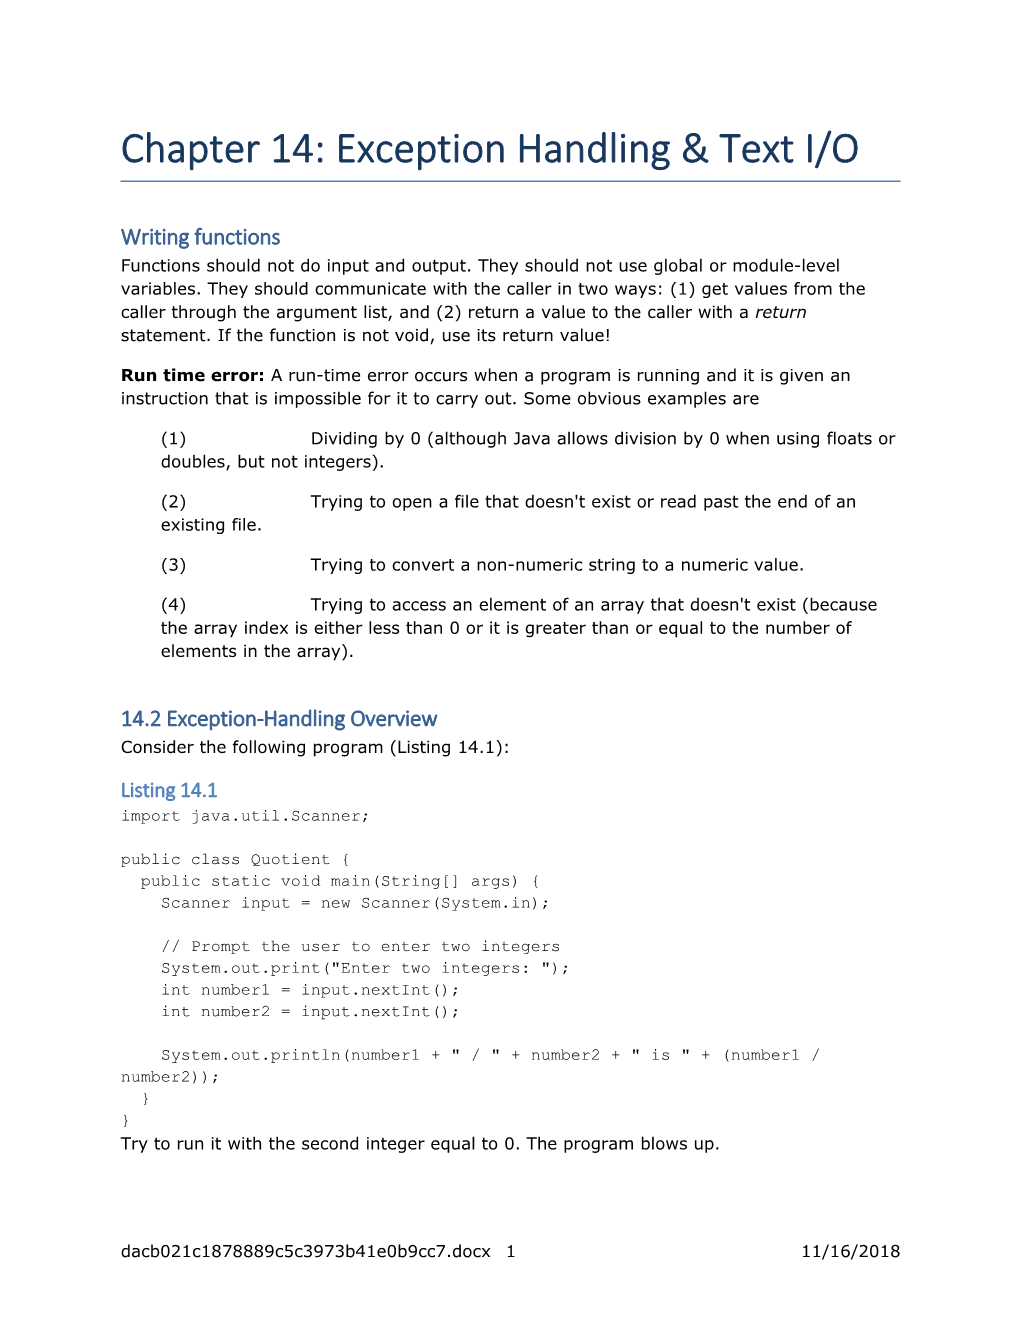 Chapter 14: Exception Handling Text I/O